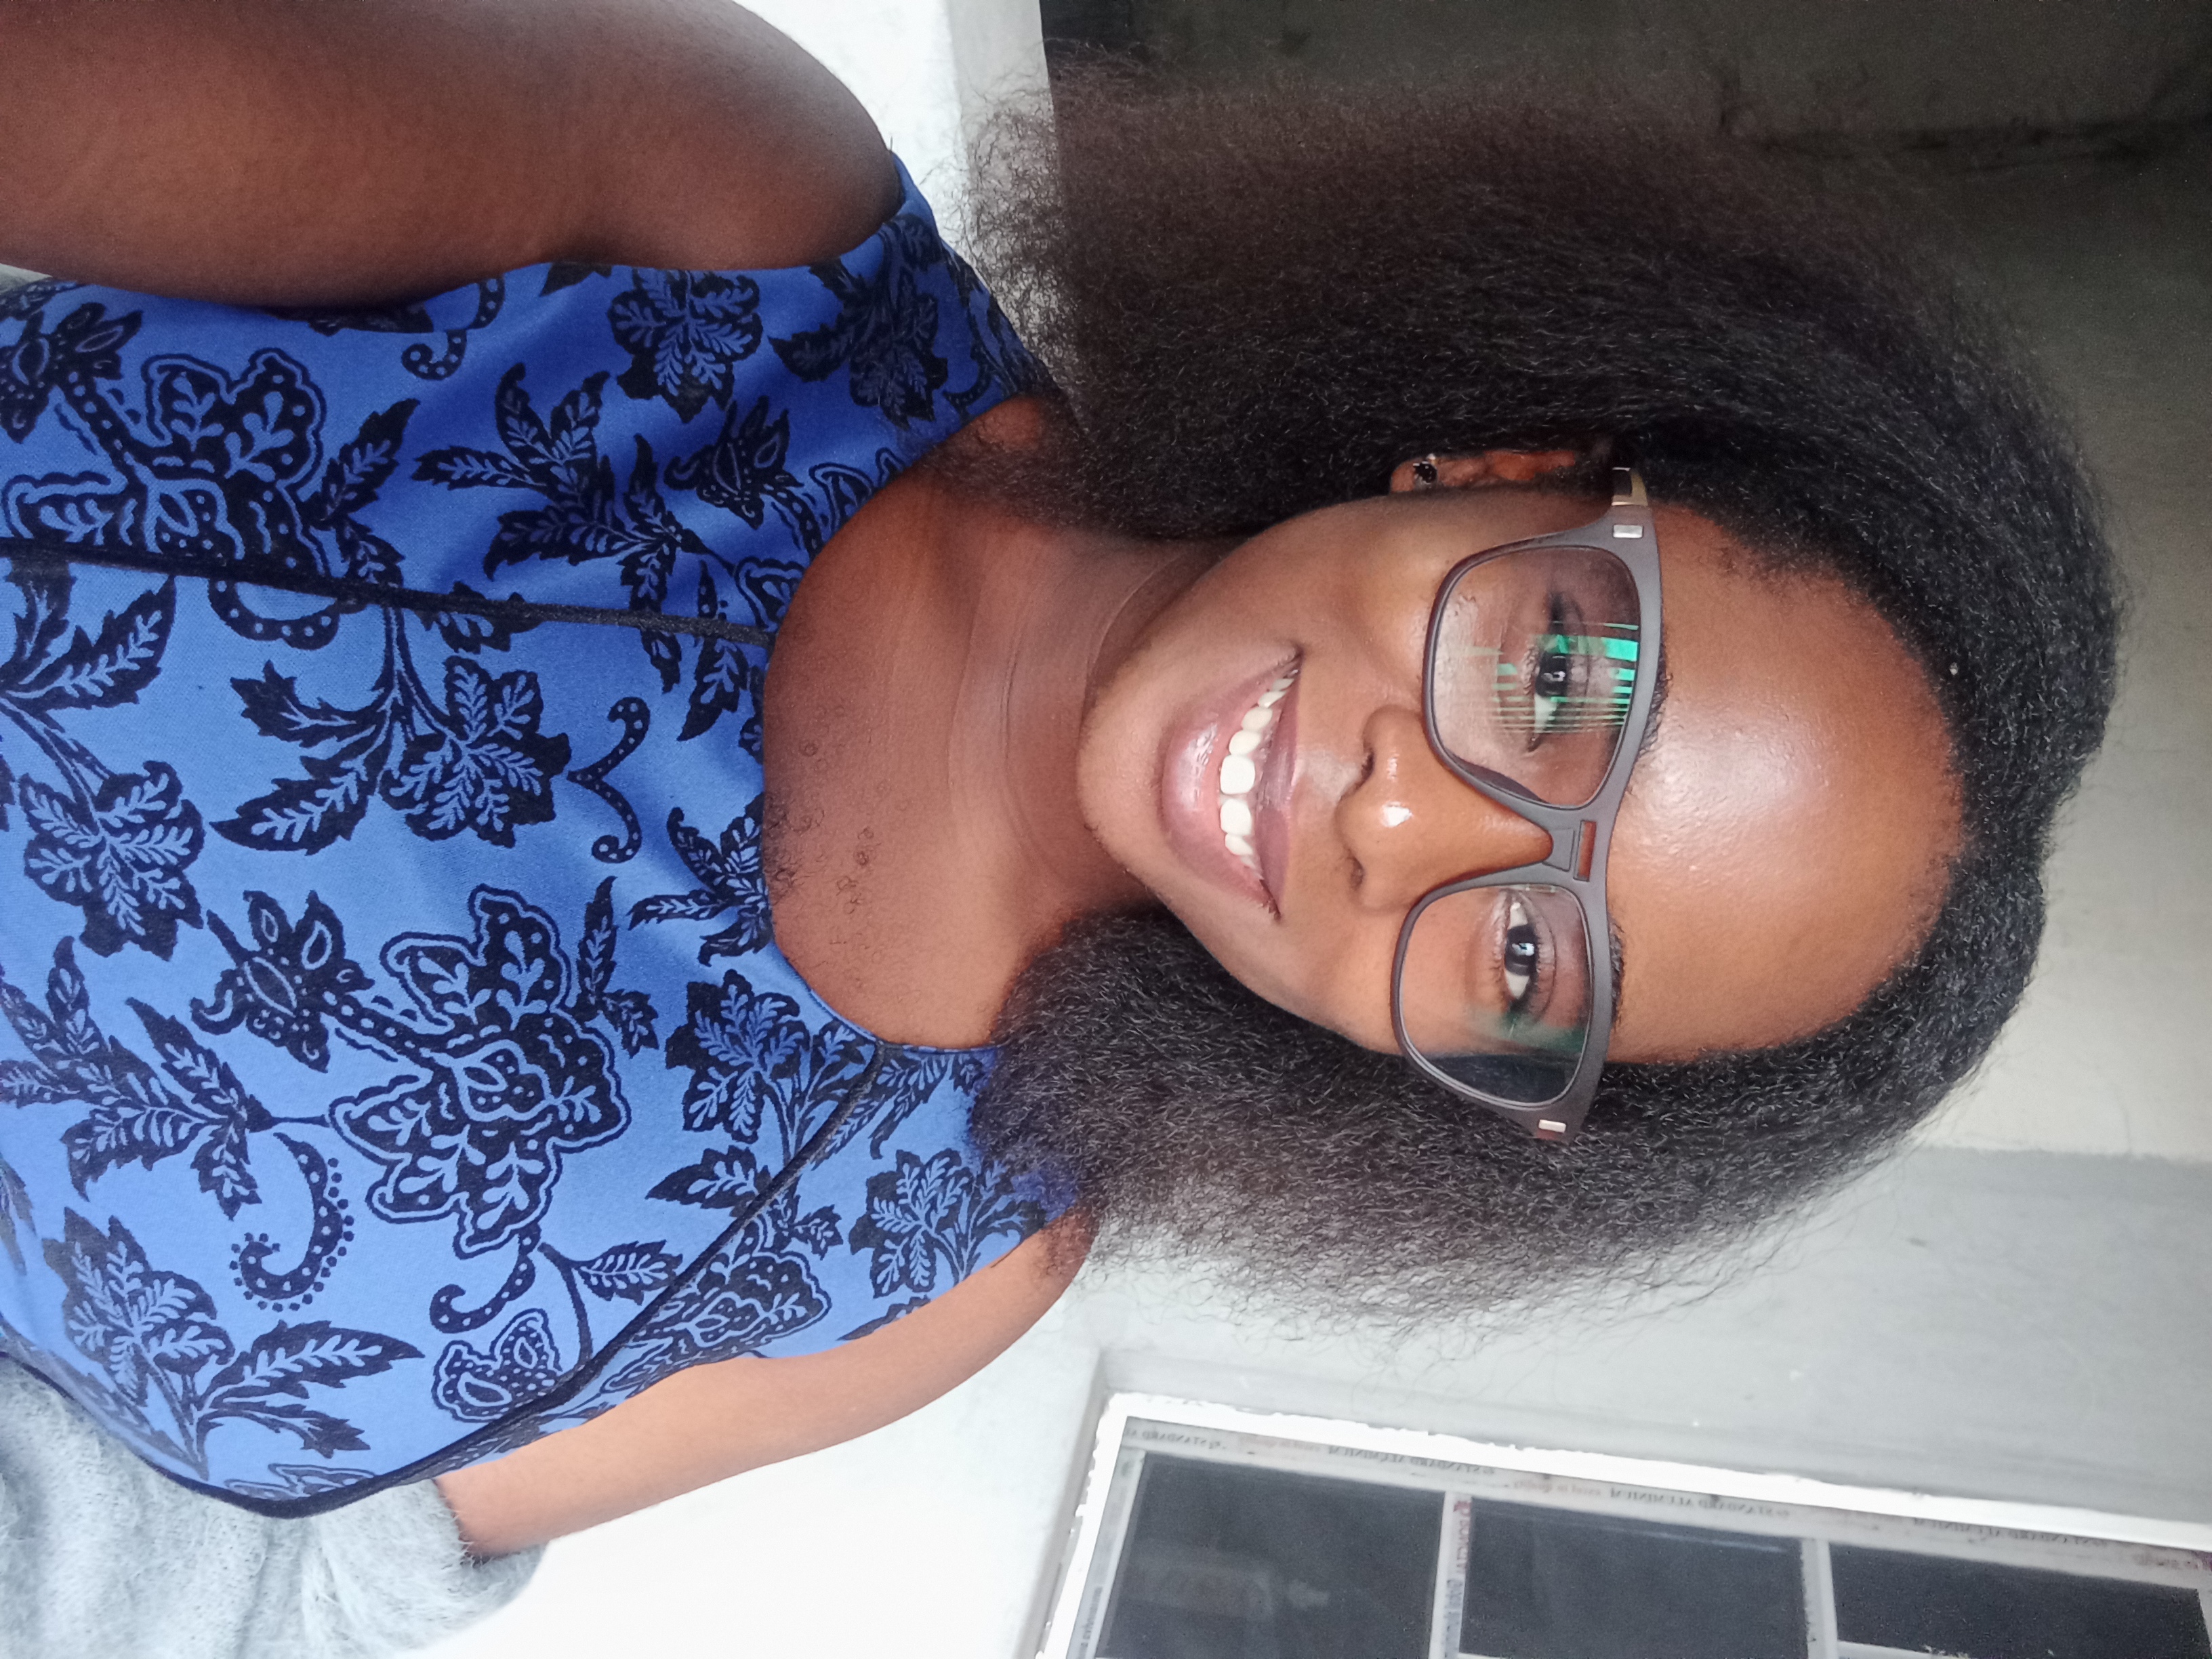 A photo of Debs, a woman from Nigeria. She has rich, black hair and is wearing a blue sleeveless dress, a pair of glasses and a smile.